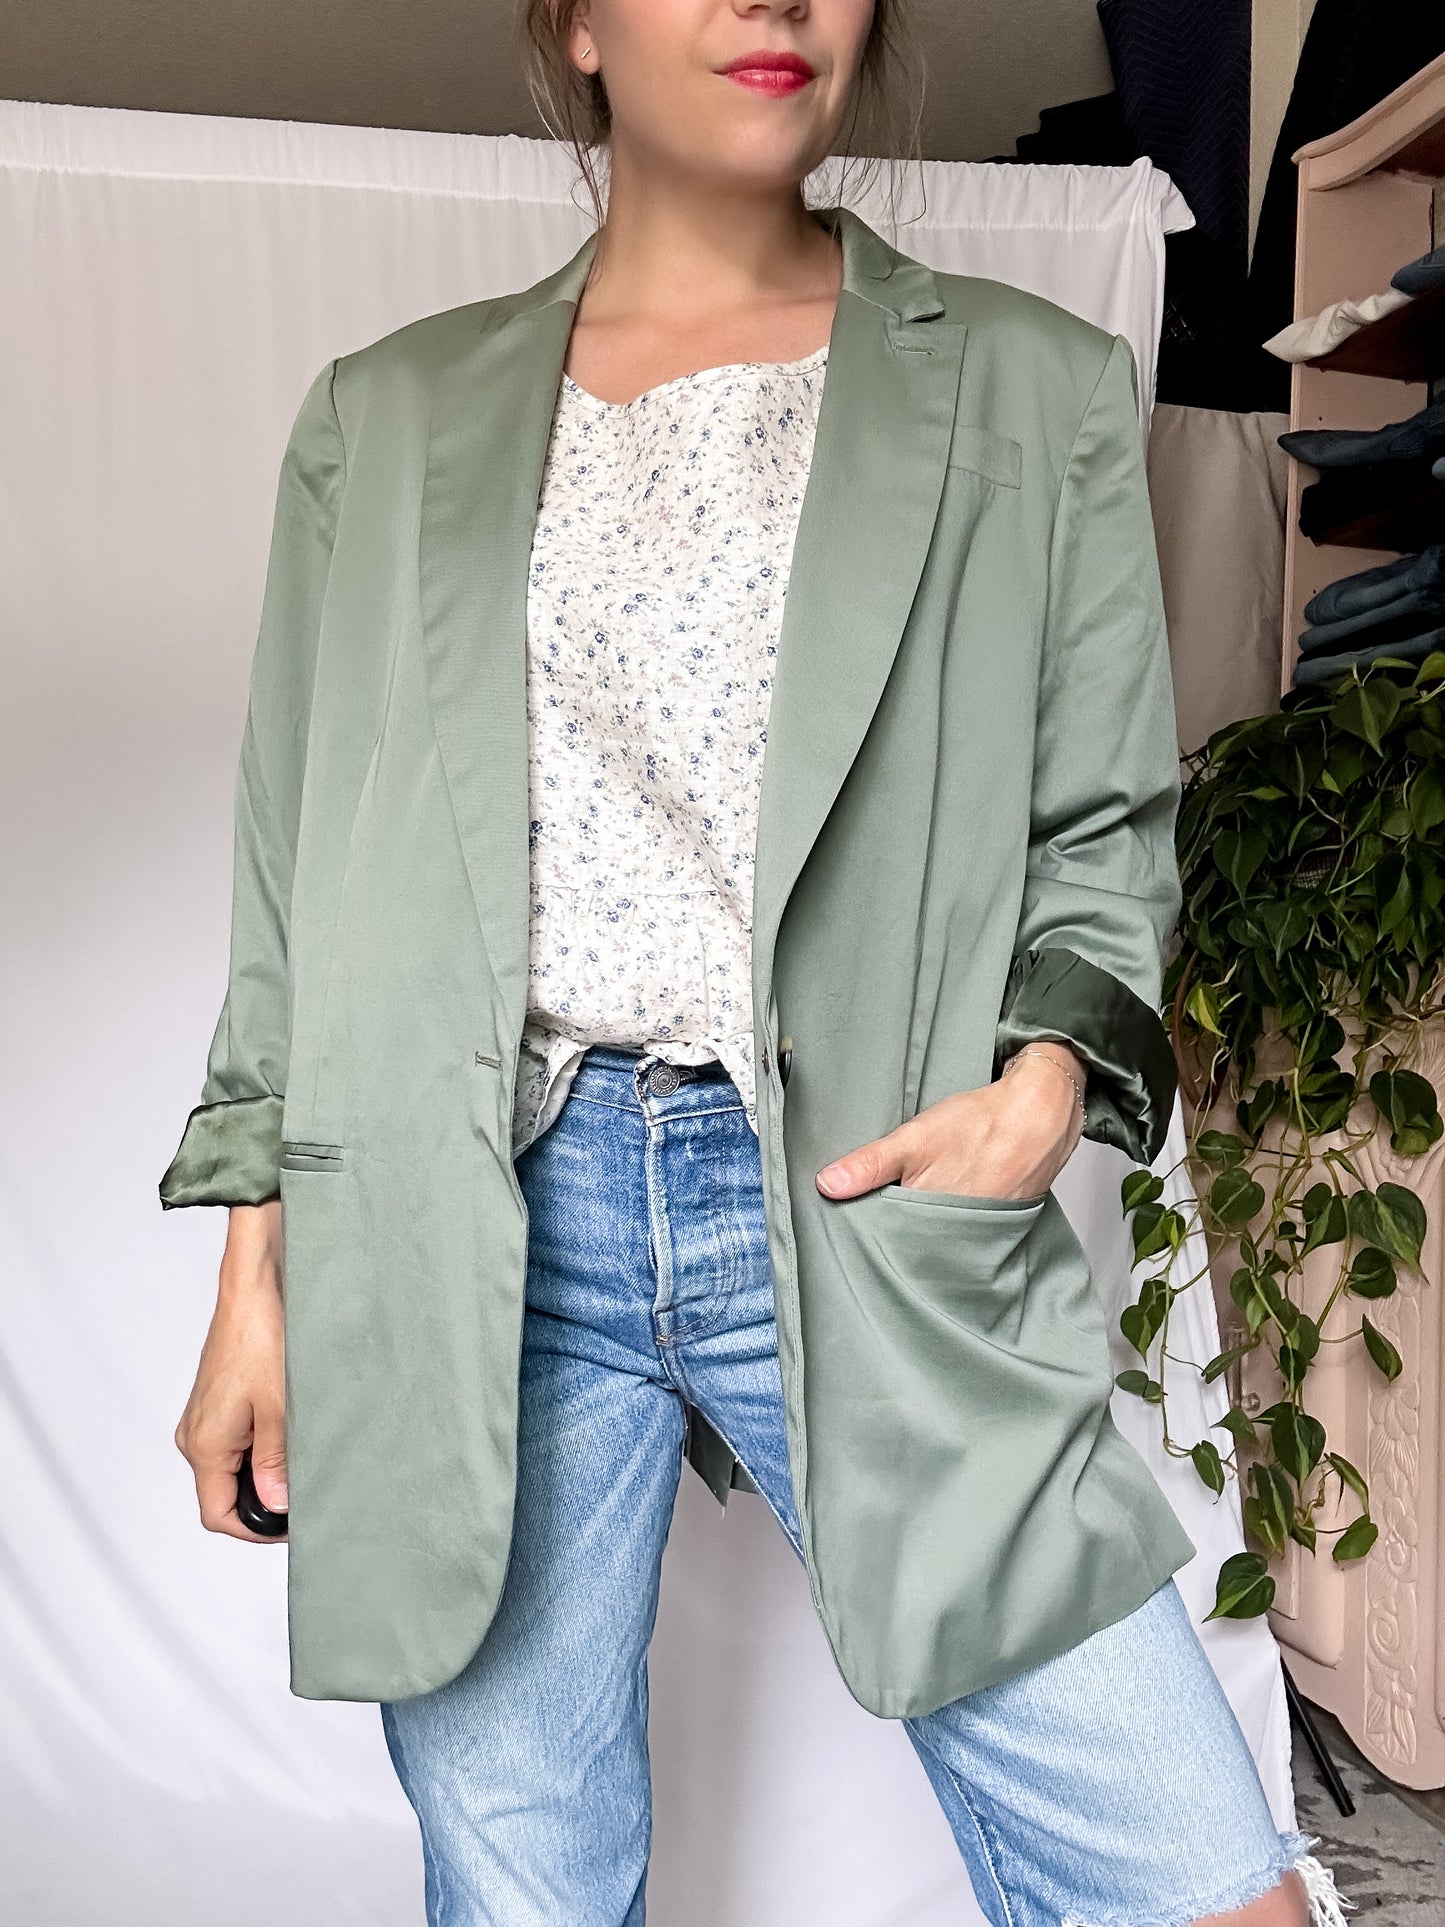 J. Crew Sage Green Relaxed Fit Blazer (fits M-XL)